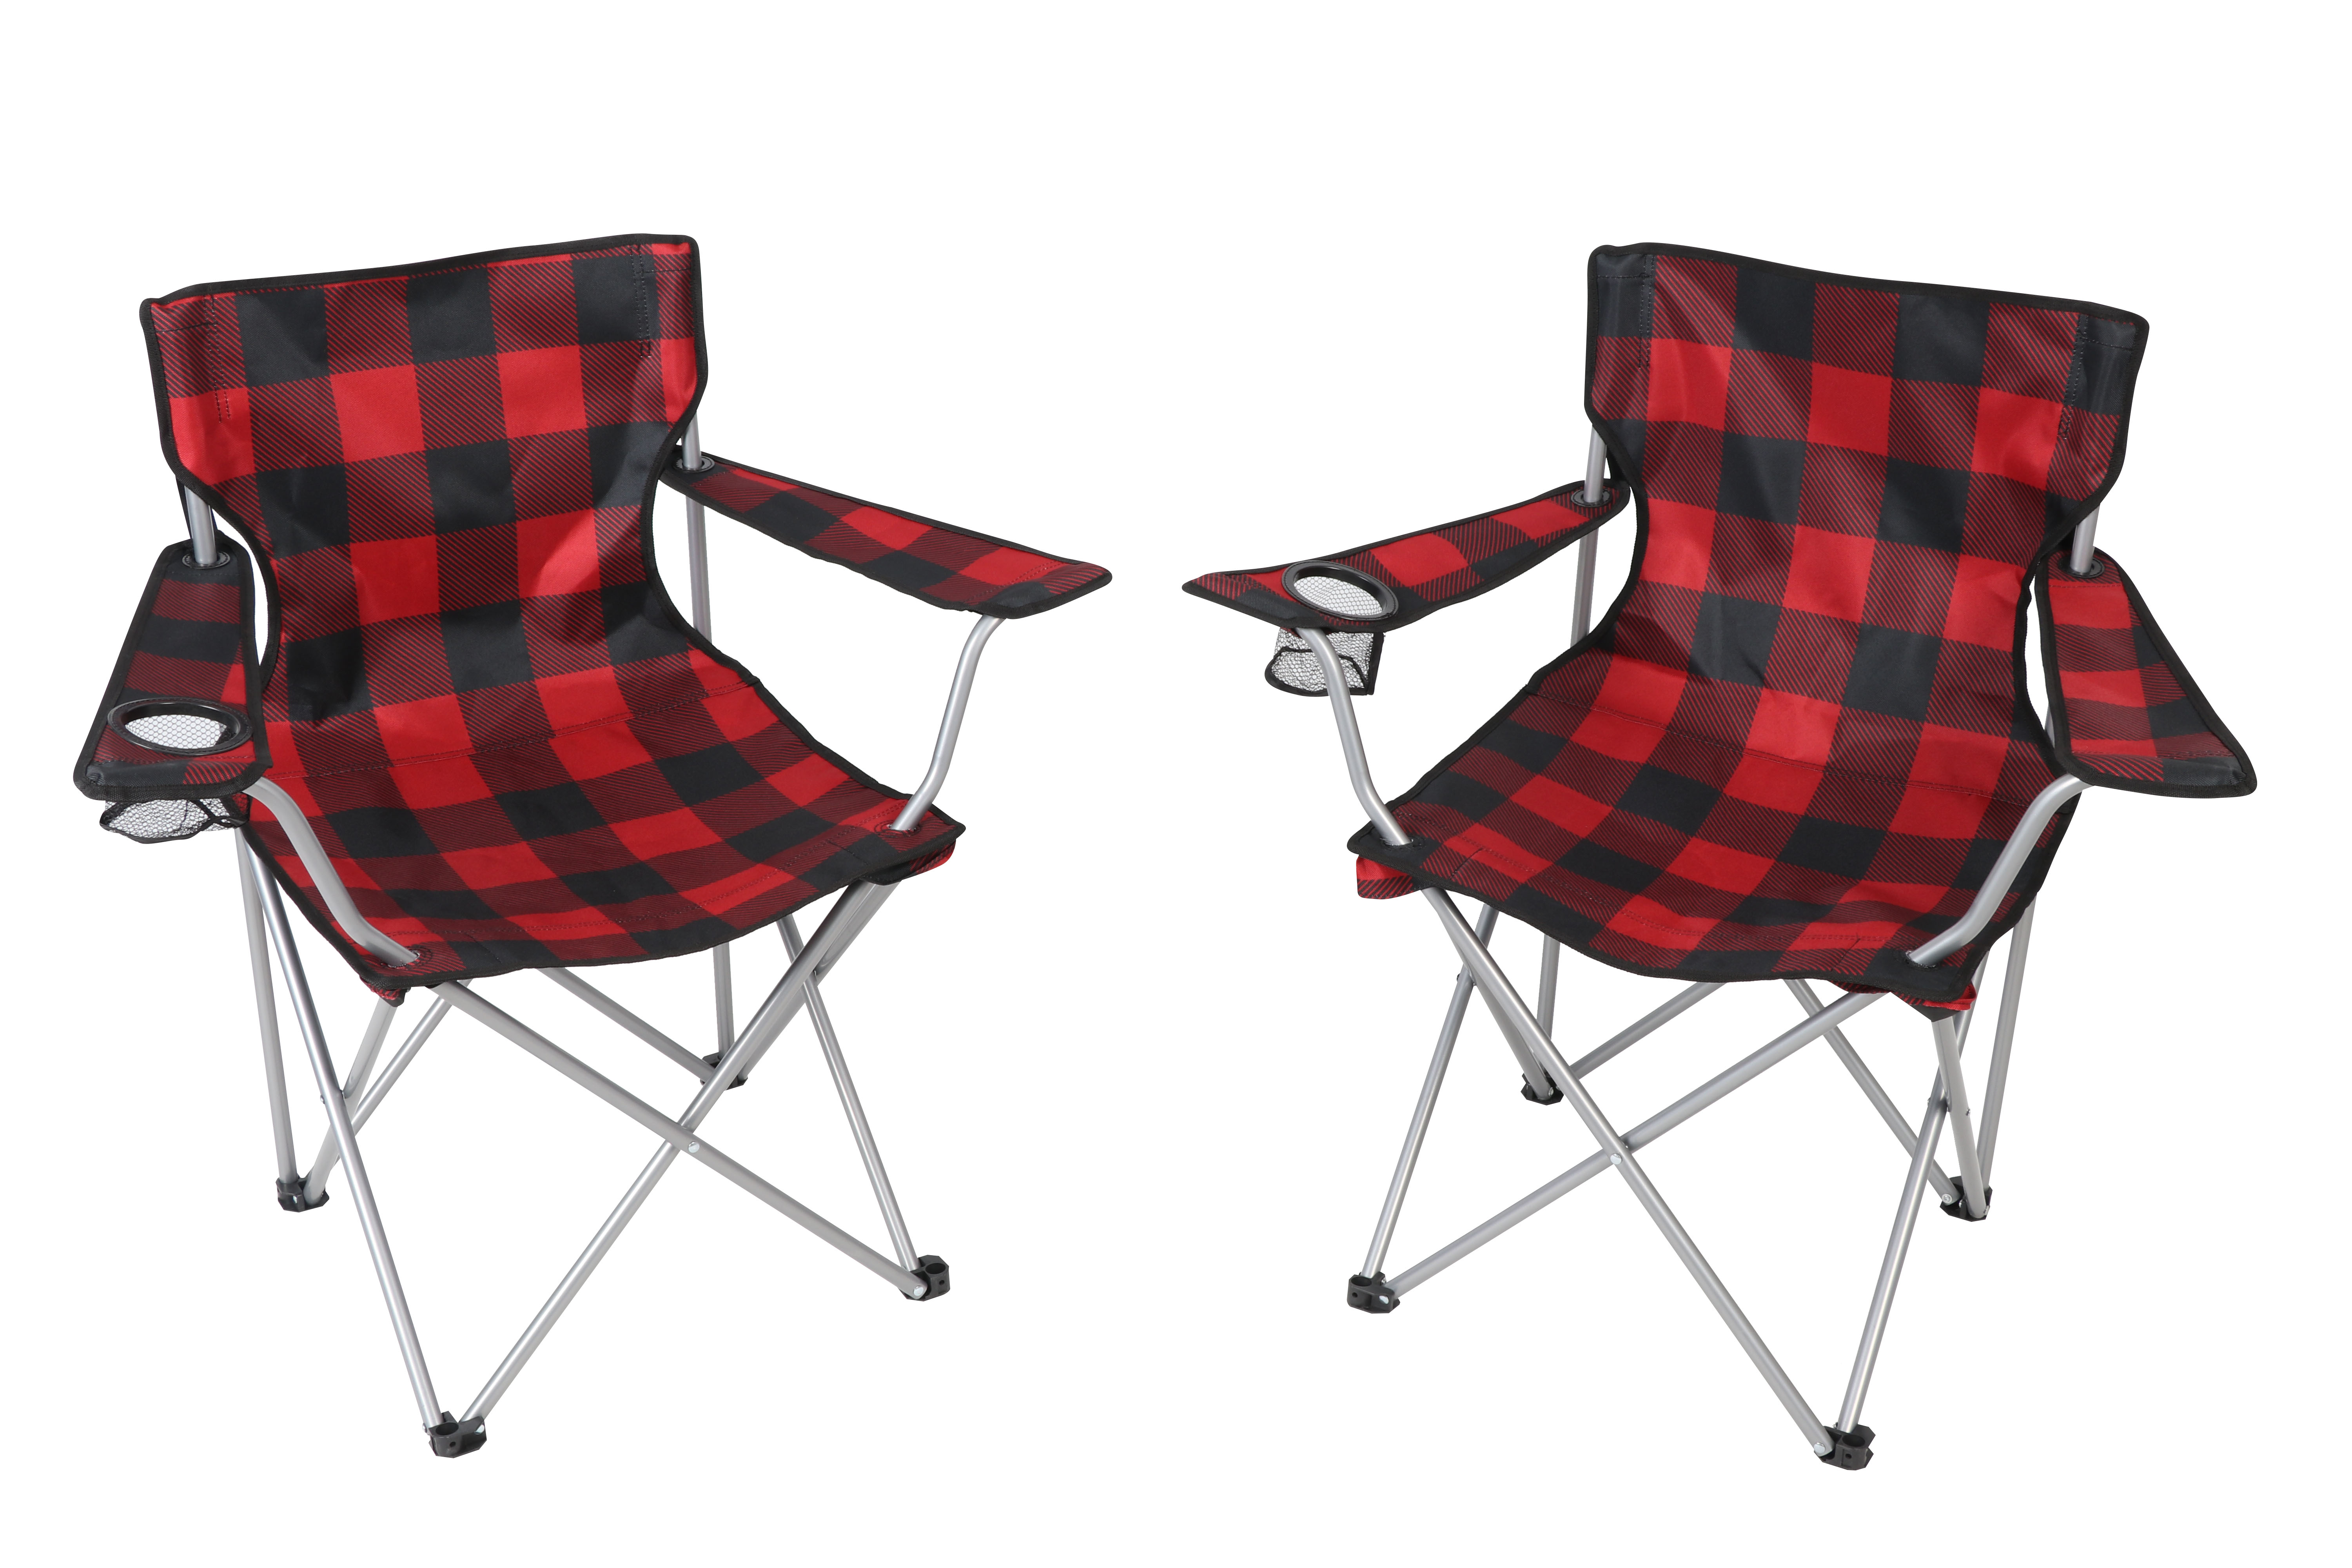 Ozark Trail 3 Piece Buffalo Plaid Camping Chairs and Blanket Combo, Red - image 2 of 6